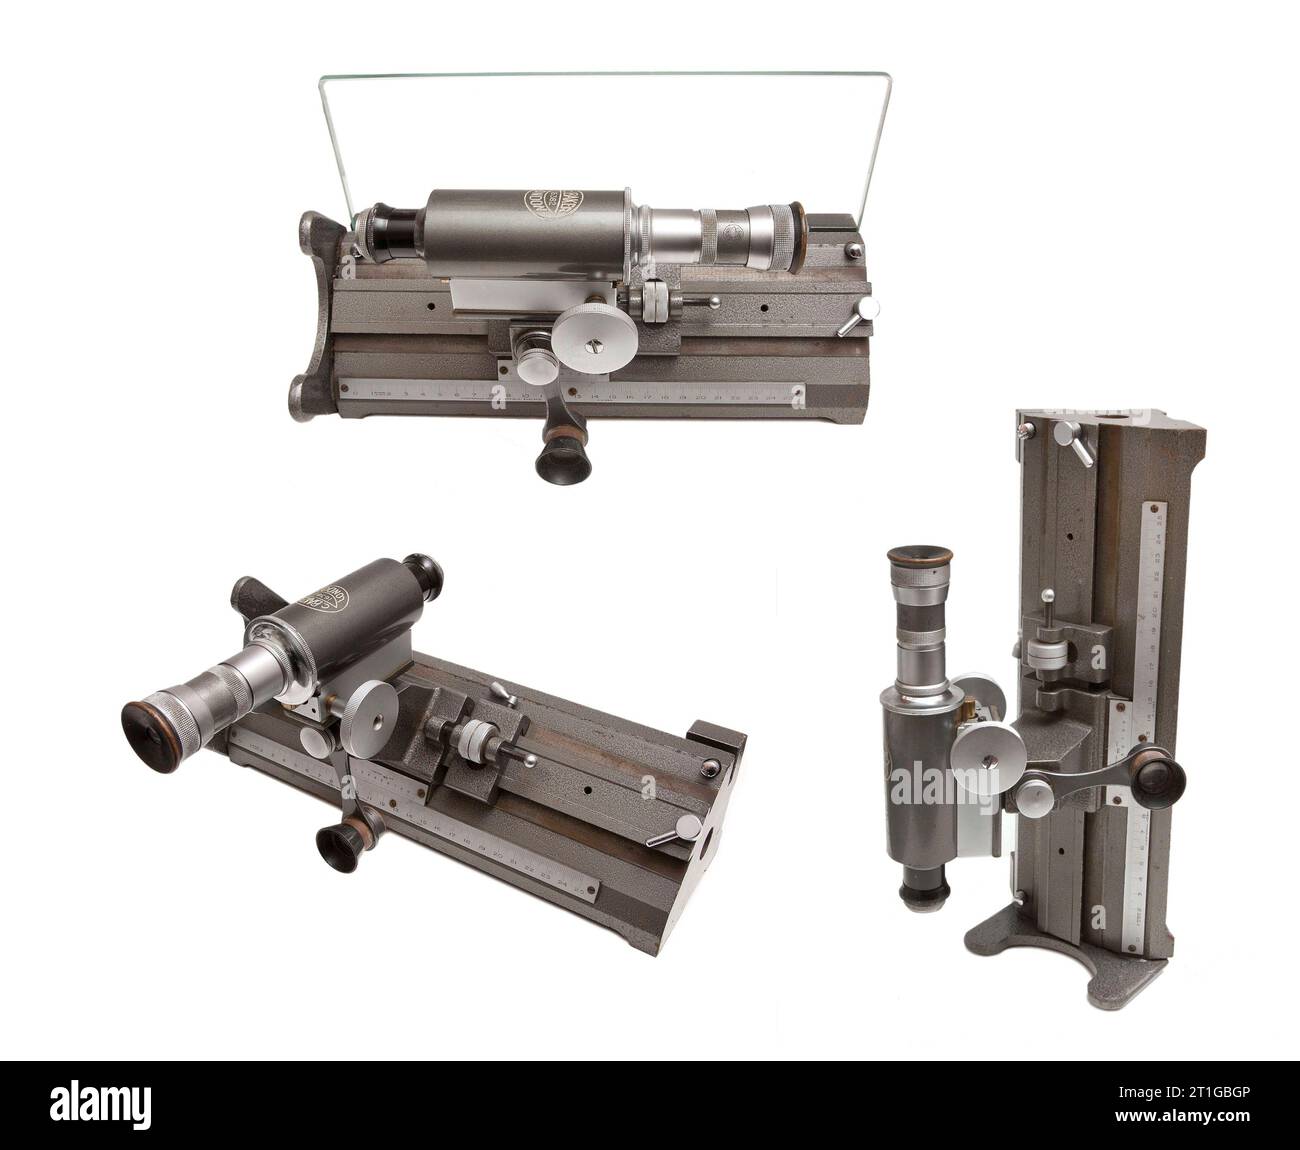 Vintage Baker travelling vernier measuring microscope, horizontal or vertical use, includes a glass plate (for placing items to ne measured) Stock Photo